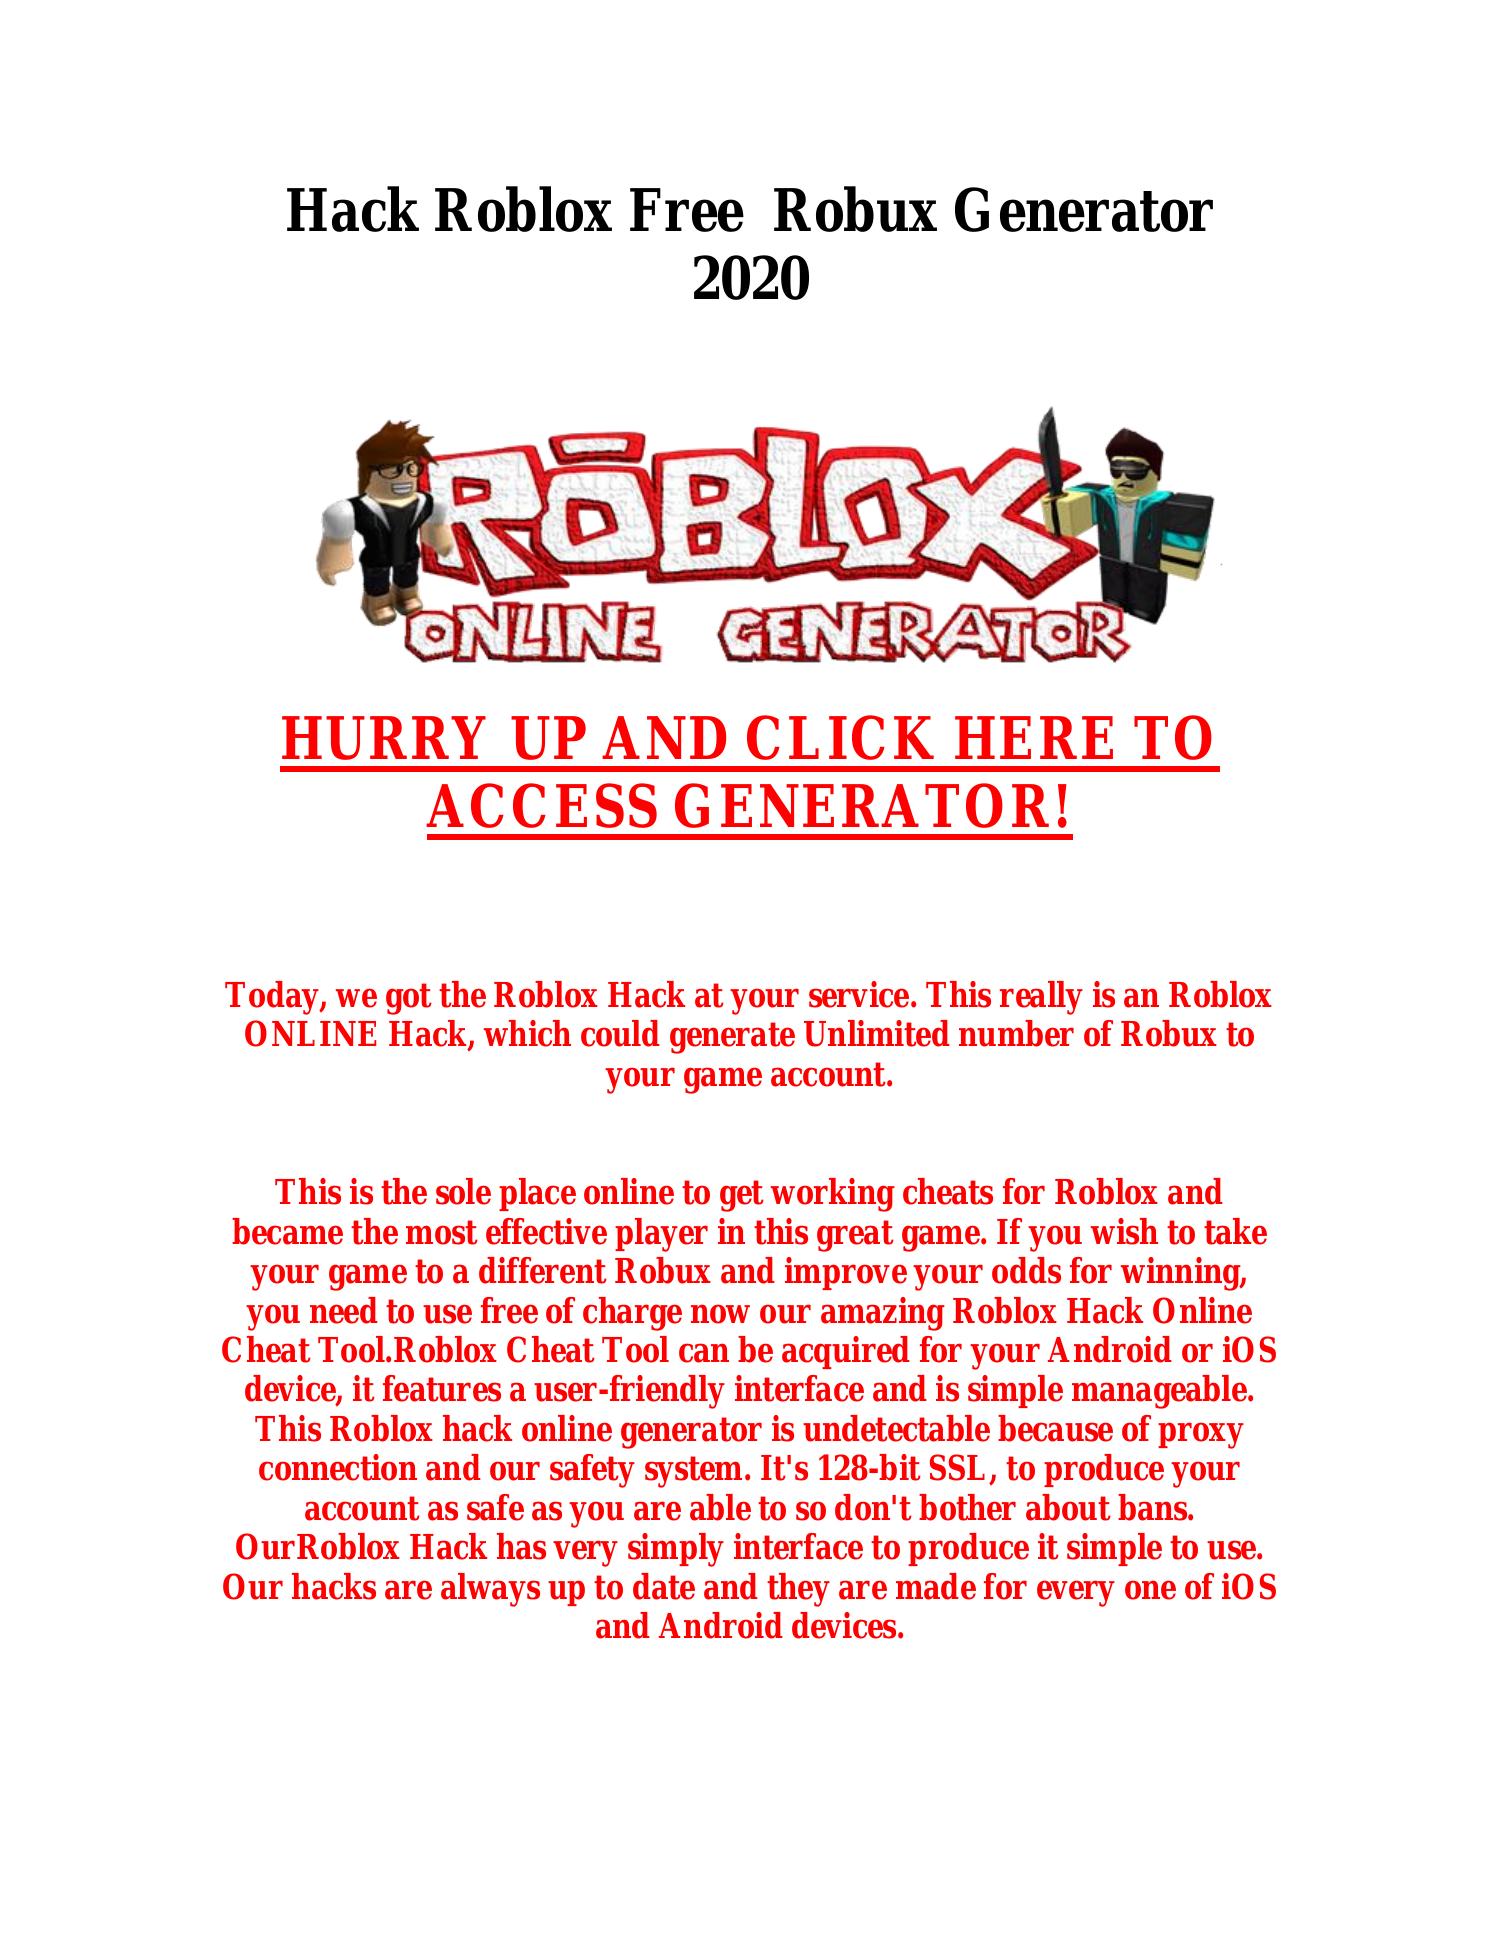 Roblox Hacking For Free Robux